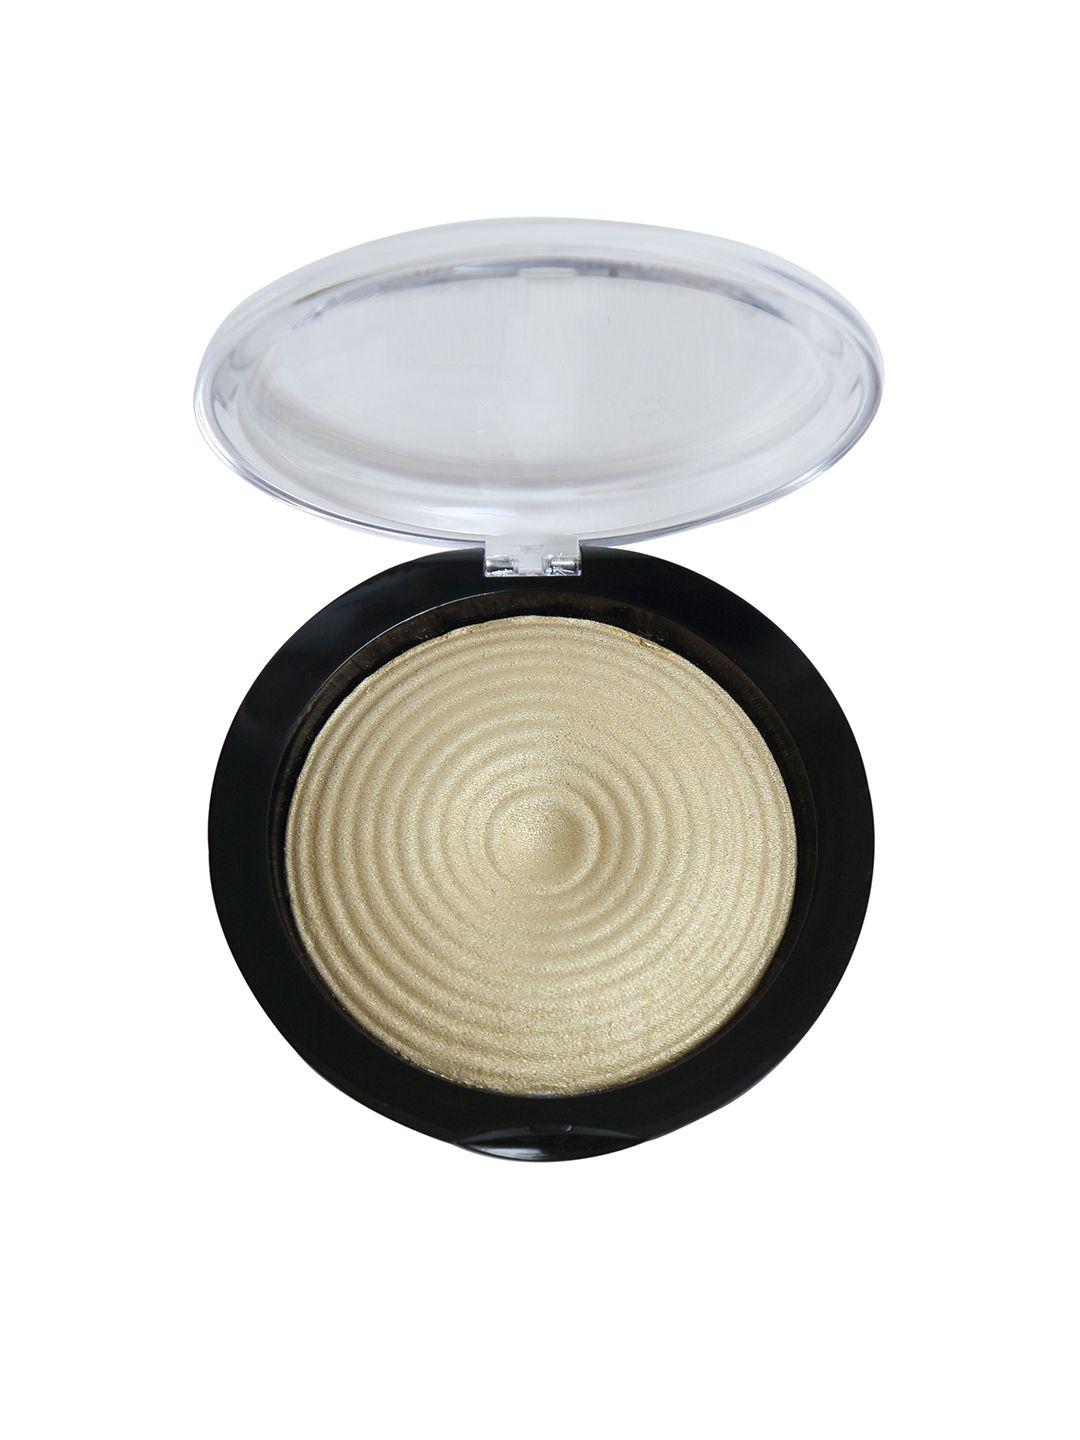 miss claire 03 baked highlighter 8 g